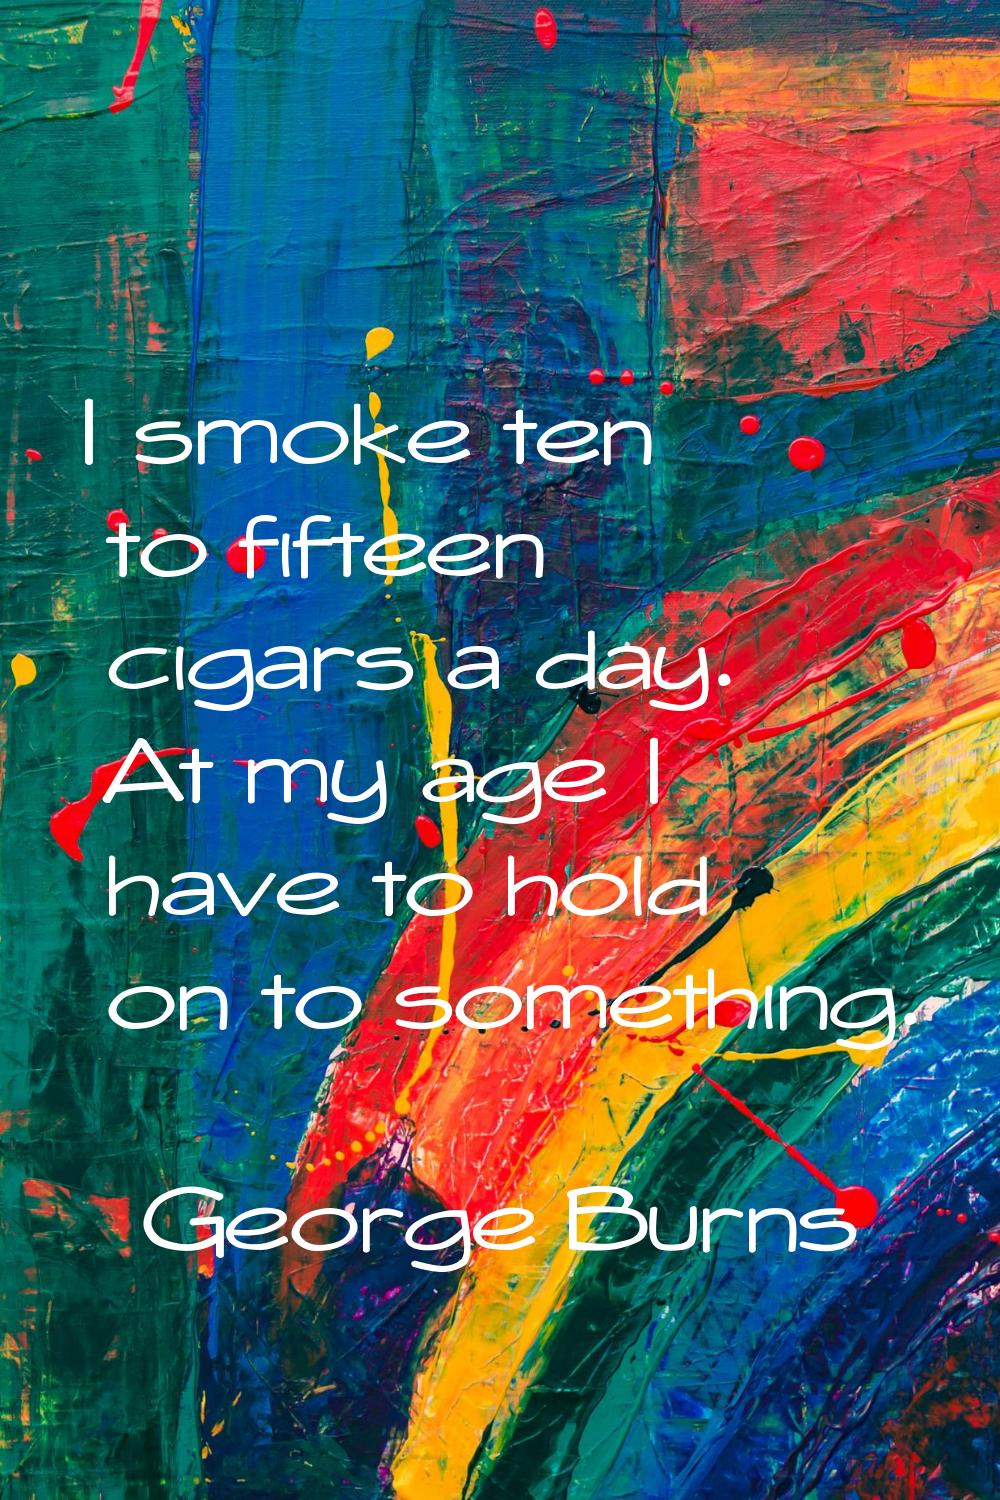 I smoke ten to fifteen cigars a day. At my age I have to hold on to something.